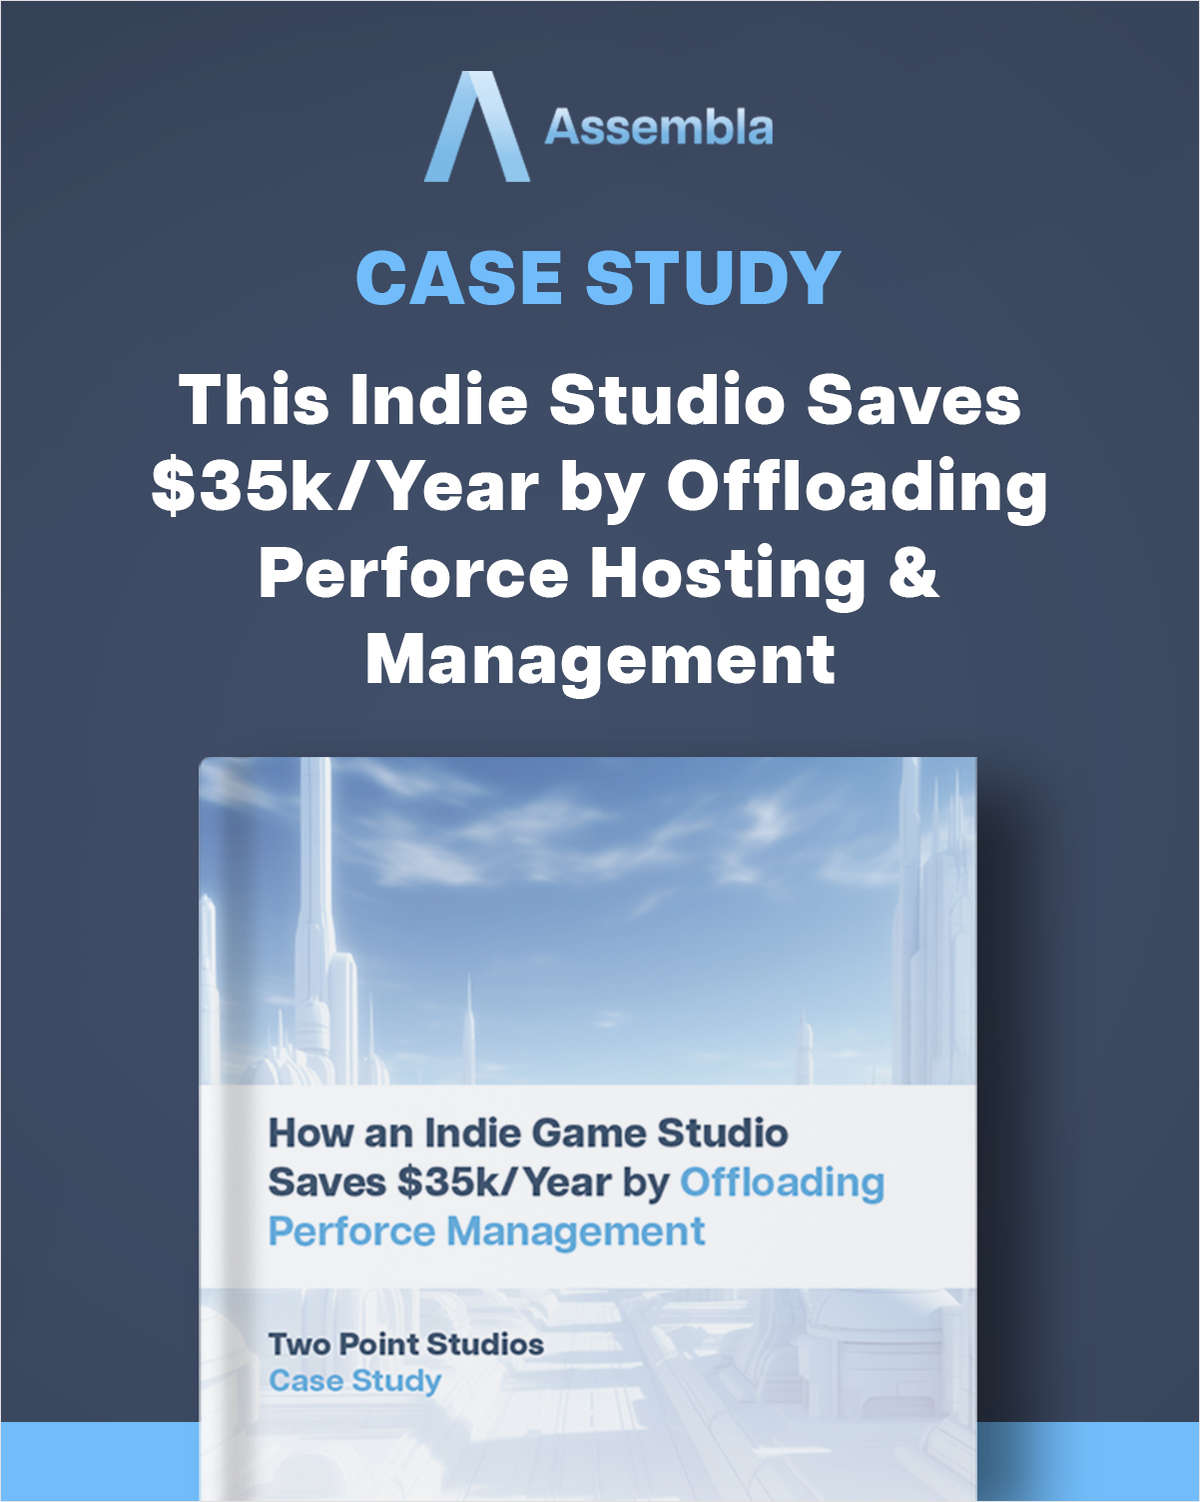 How this Indie Game Studio Saves $35k/Year by Offloading Perforce Management